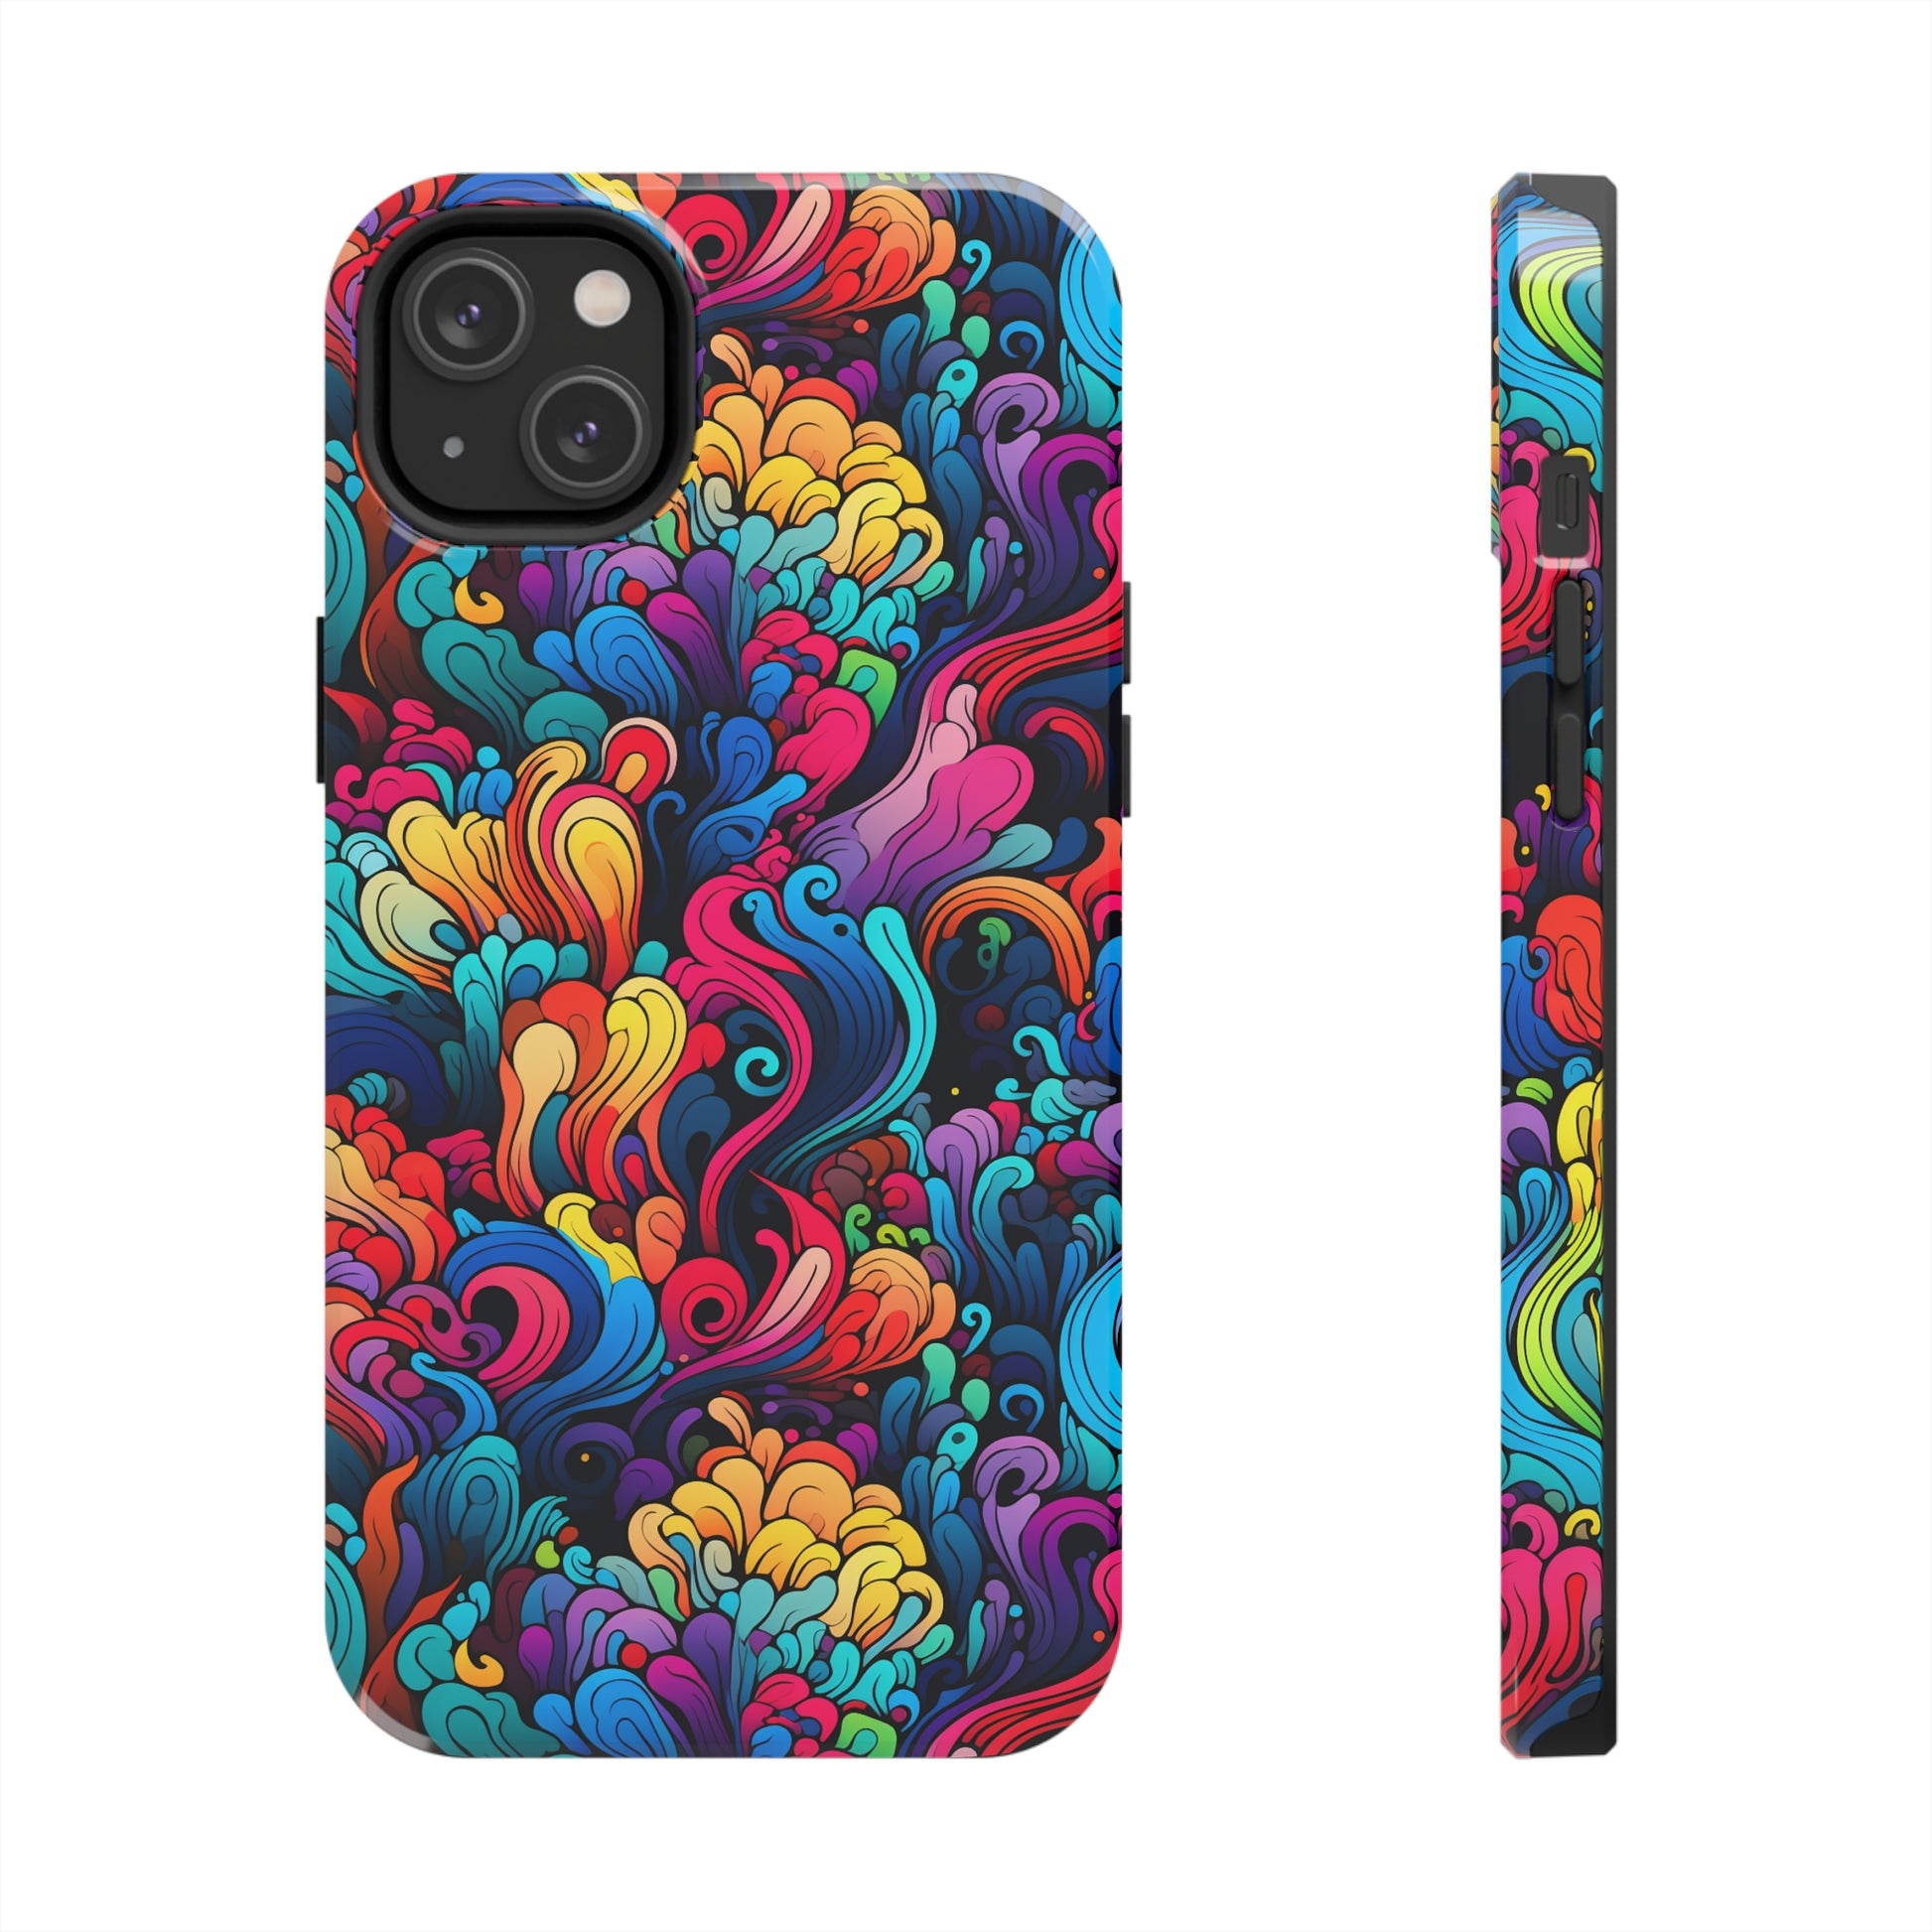 Durable iPhone Case with Psychedelic Inspiration